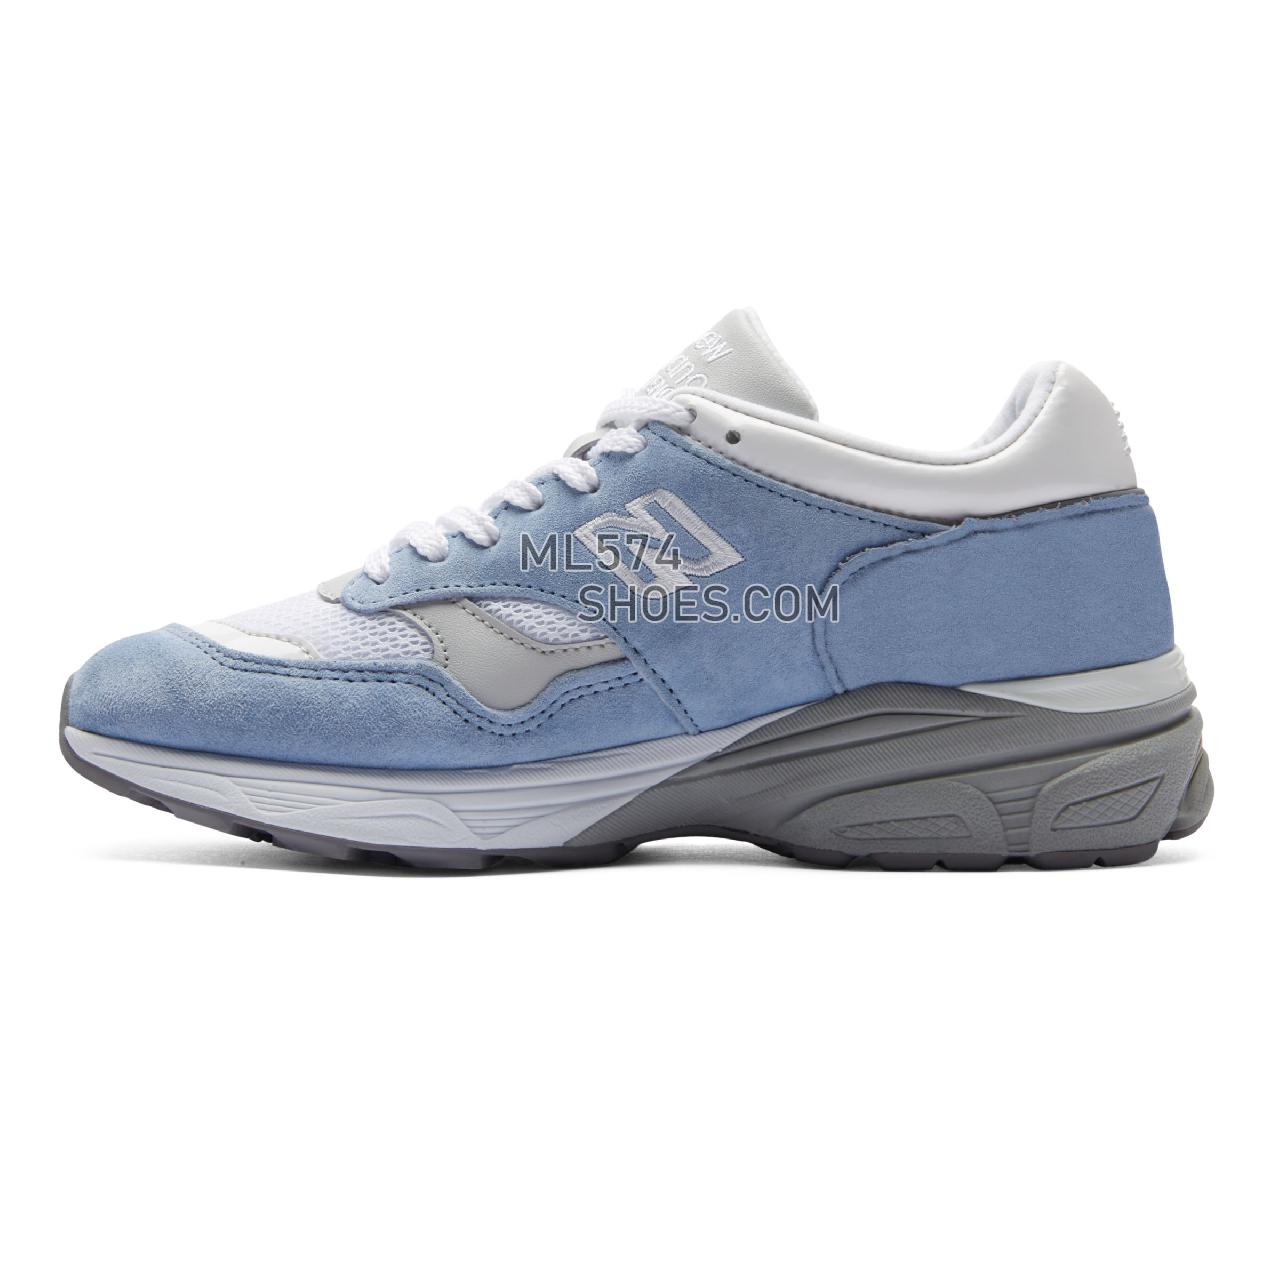 New Balance Made in UK 1500.9 - Men's Made in UK 1500.9 WL15009V1-27950 - Blue with White - W15009DB